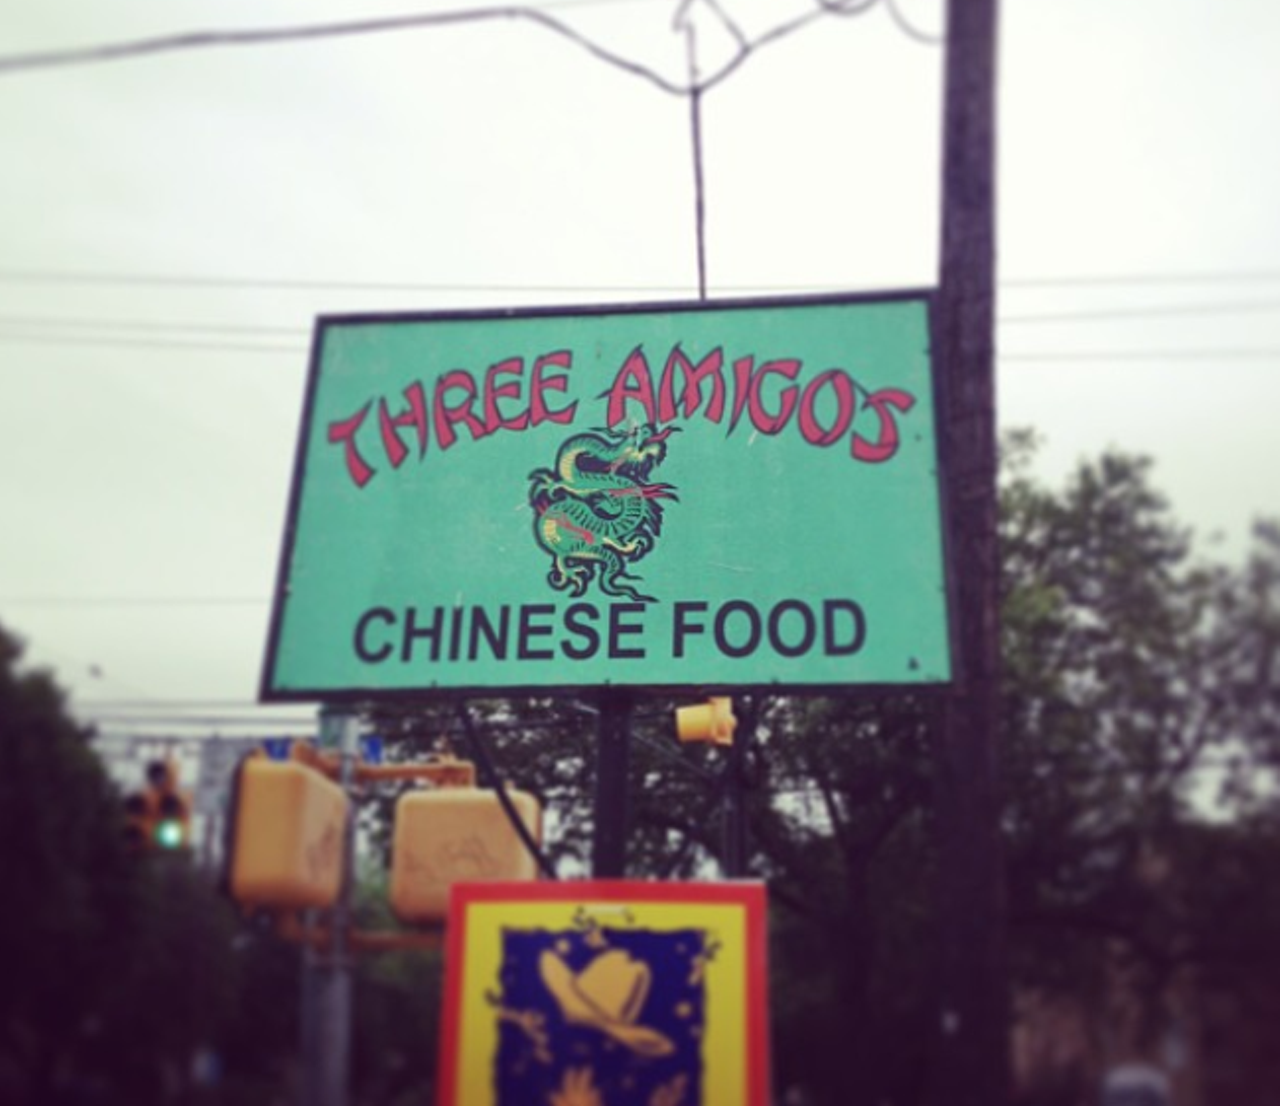 Three Amigos Grocery
303 NW 36th St, (210) 437-4013
If there’s one Westside spot you give a chance, let is be this one. Loved by the community, this corner store spot dishes out delicious Chinese fare for wicked low prices. Go. Go now.
Photo via Instagram / tito3000